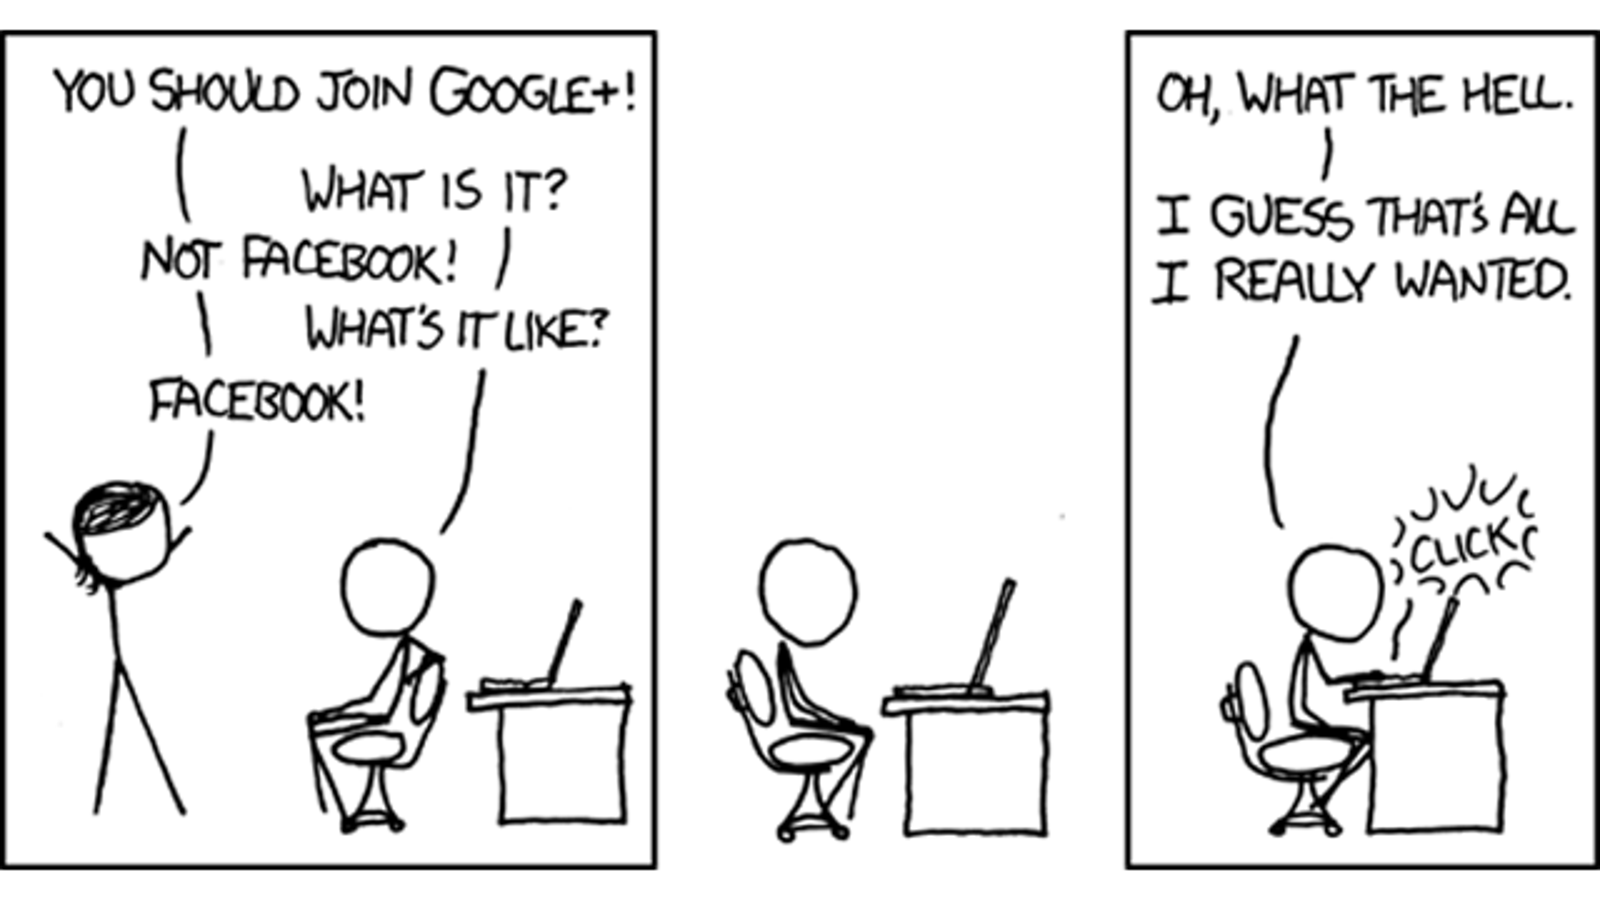 xkcd author